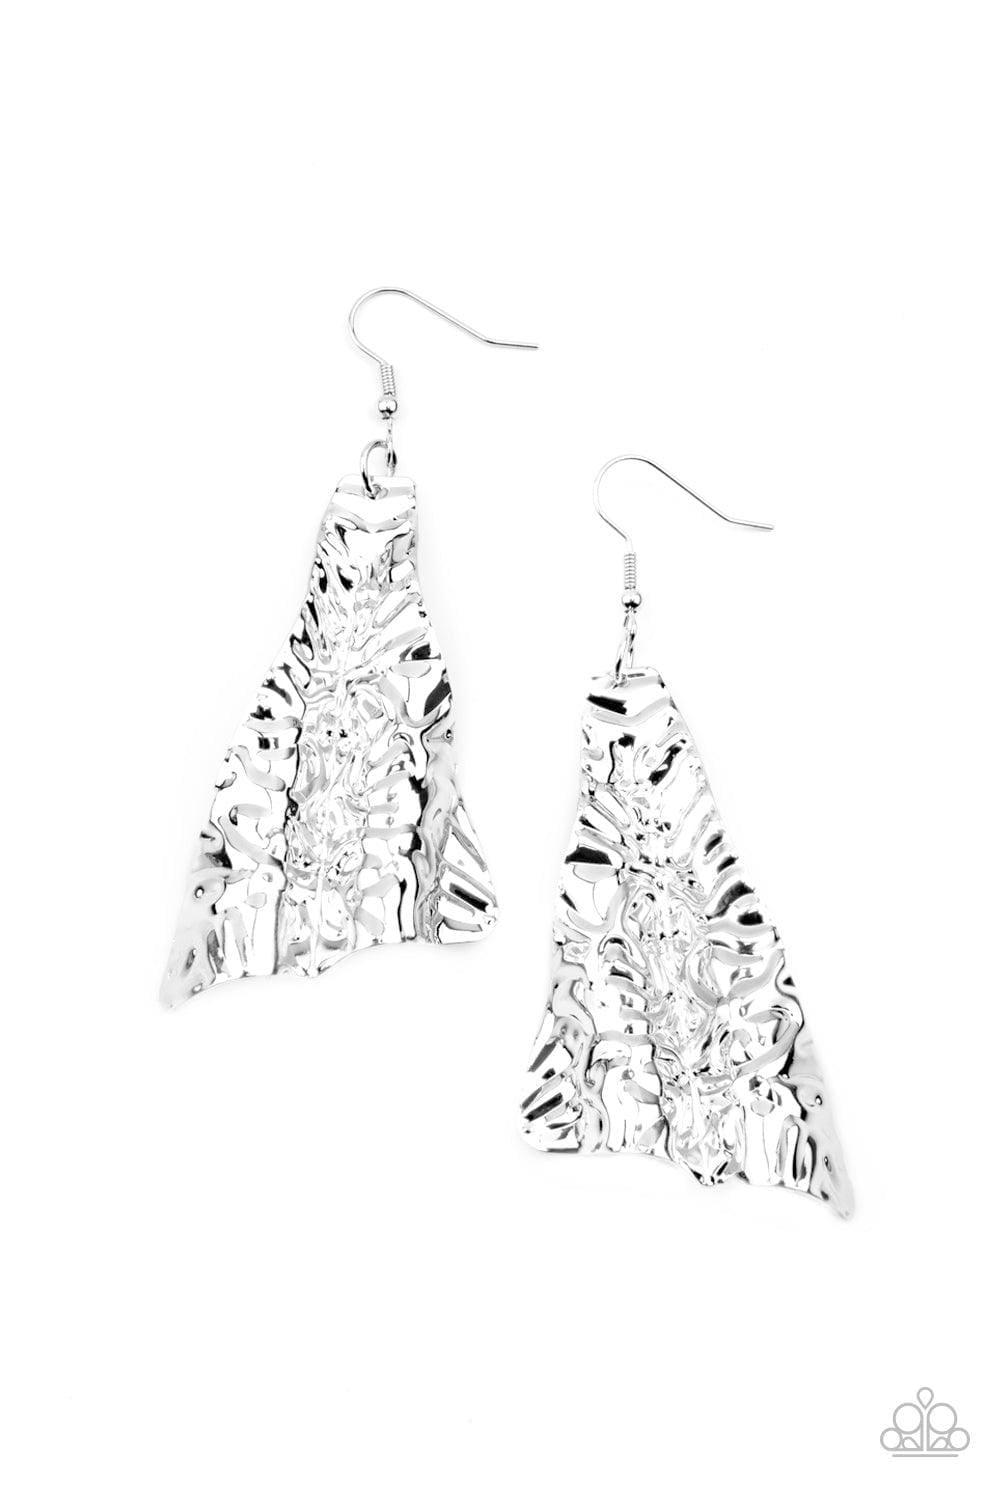 Paparazzi Accessories - How Flare You! - Silver Earrings - Bling by JessieK